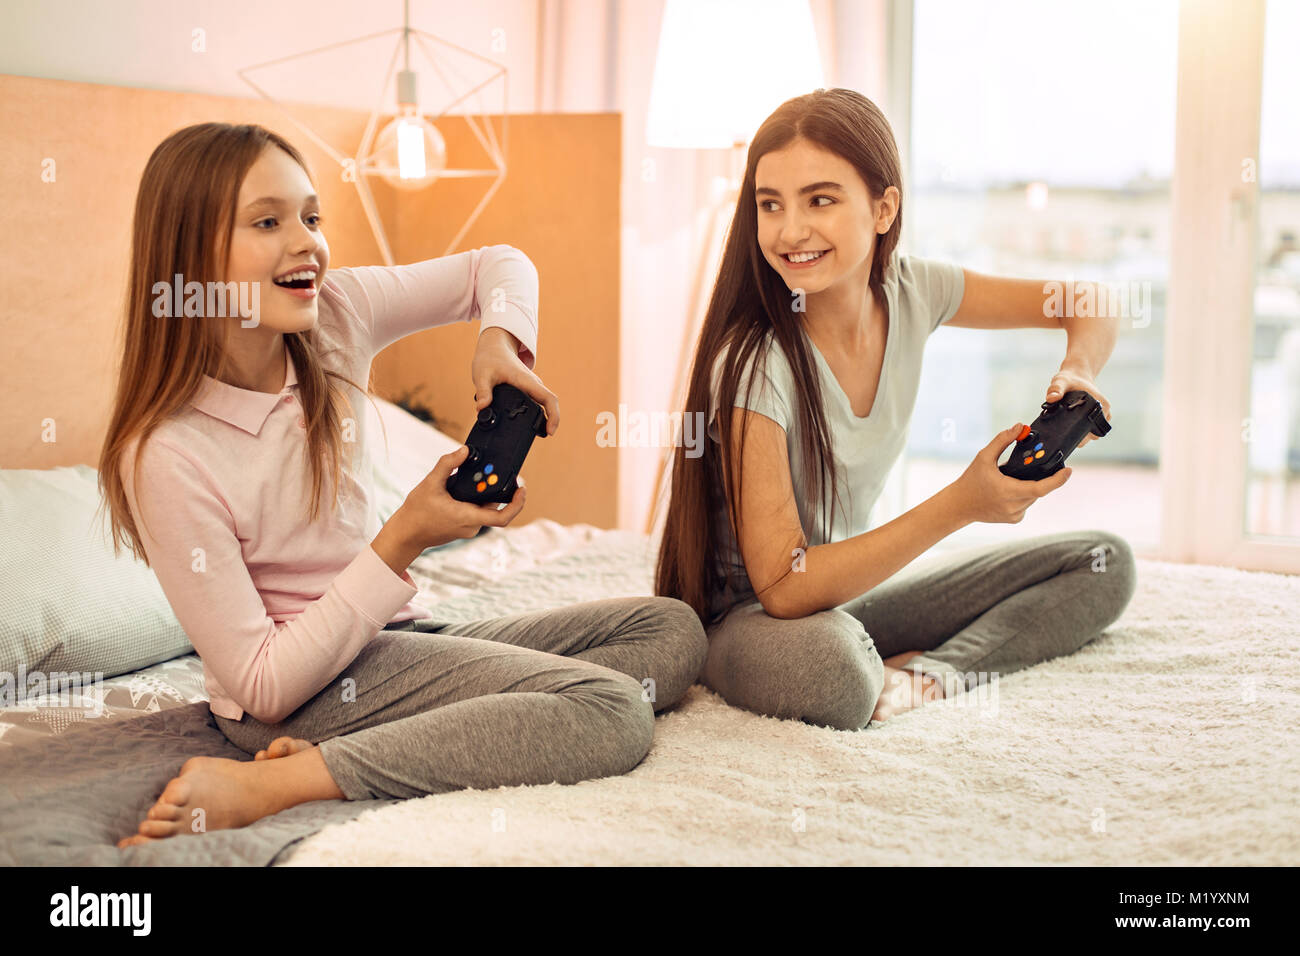 Two teenage sisters playing video game enthusiastically Stock Photo